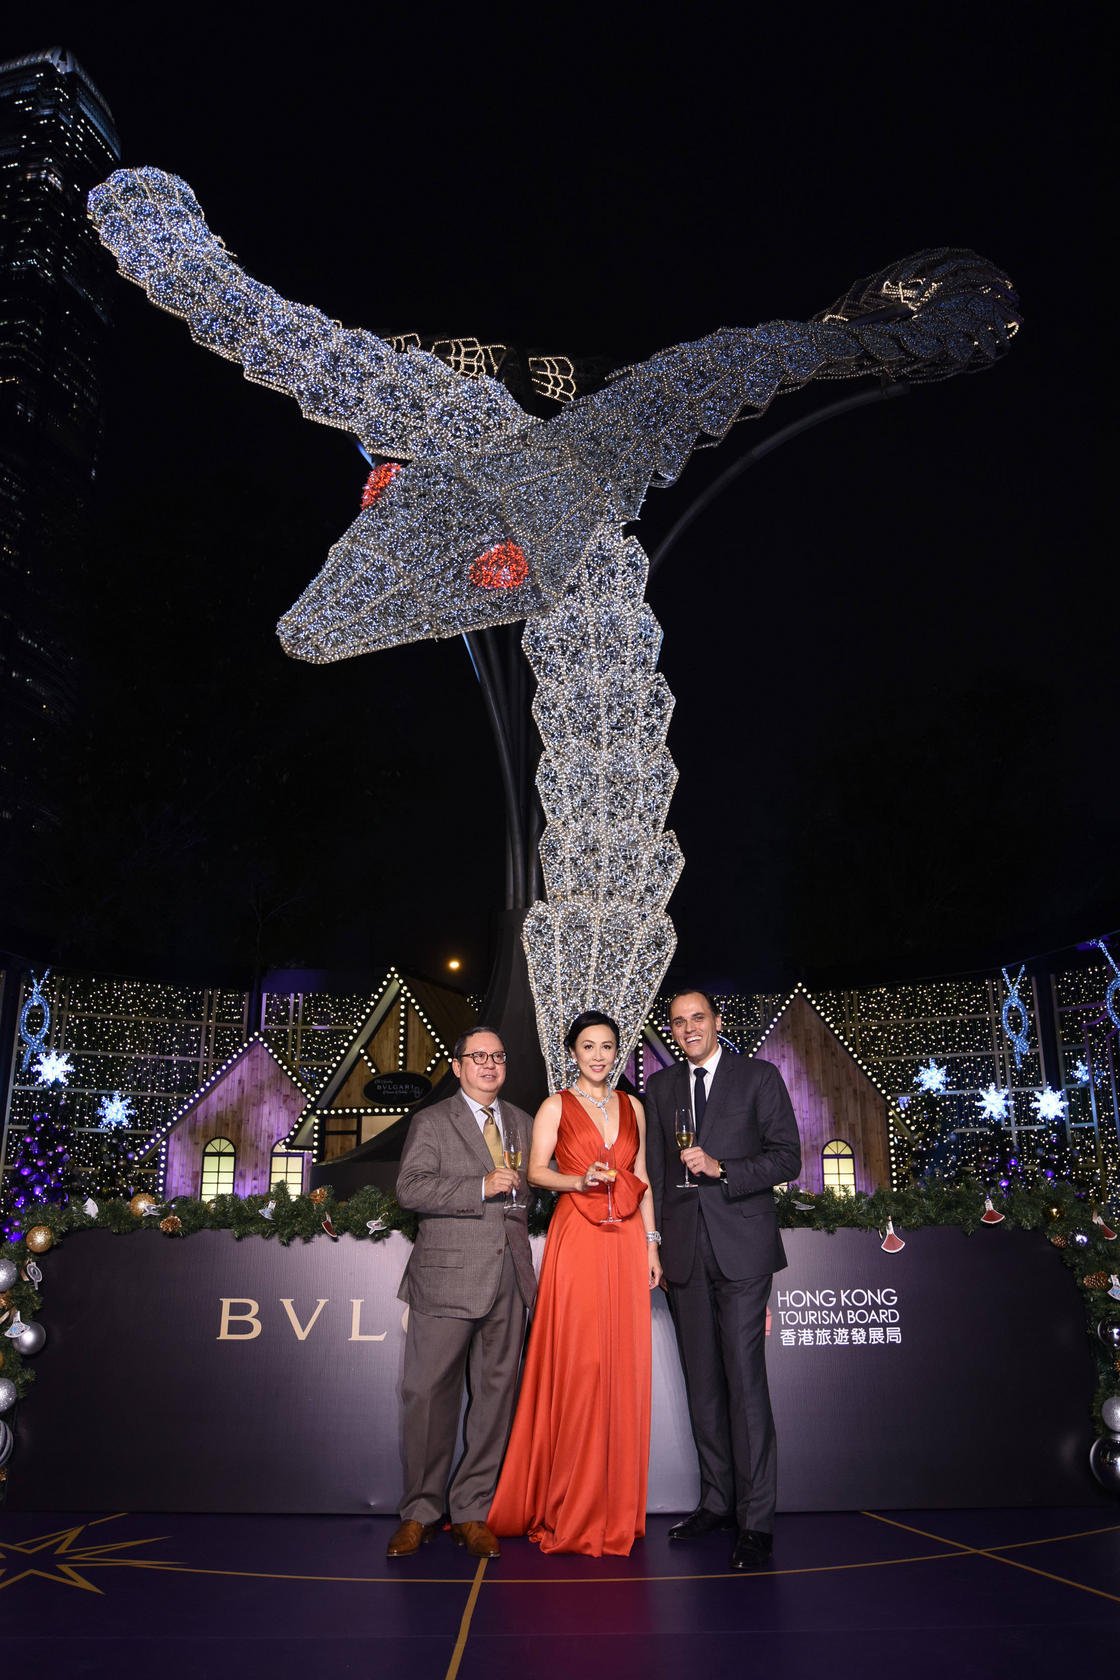 Peter Lam, Carina Lau and Antoine Pin host the lighting ceremony #stylescmp